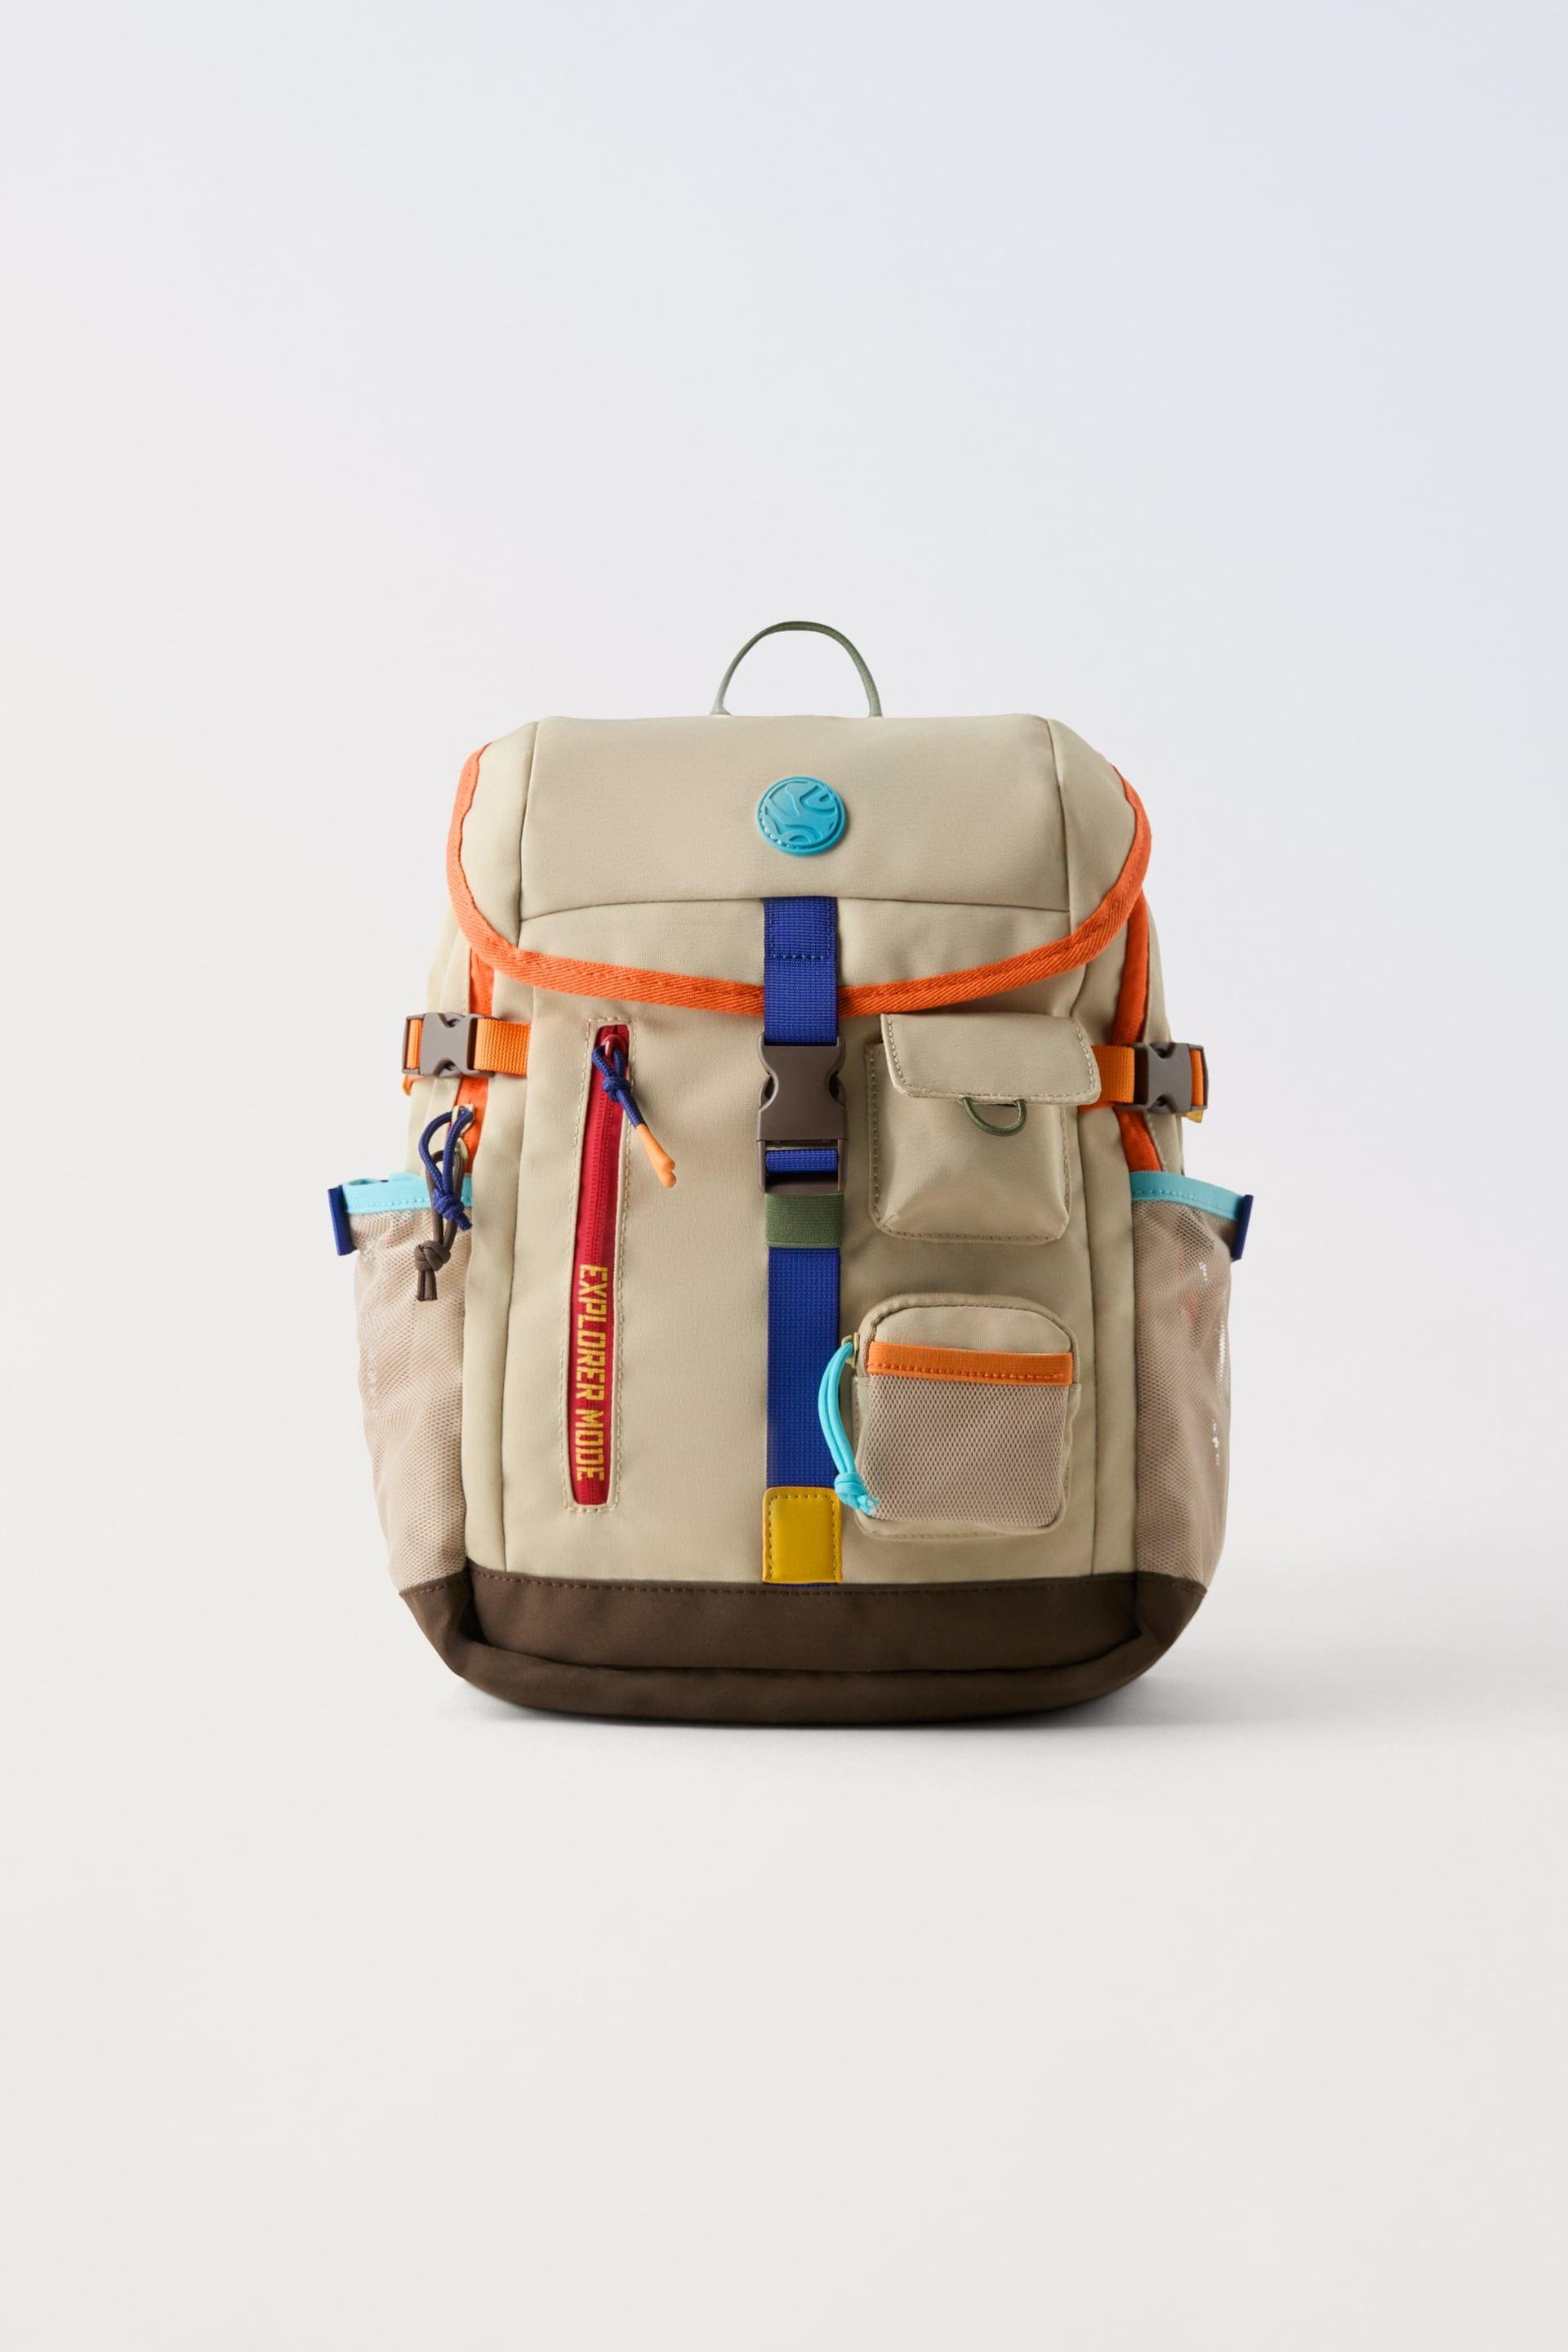 CAMPING BACKPACK by ZARA